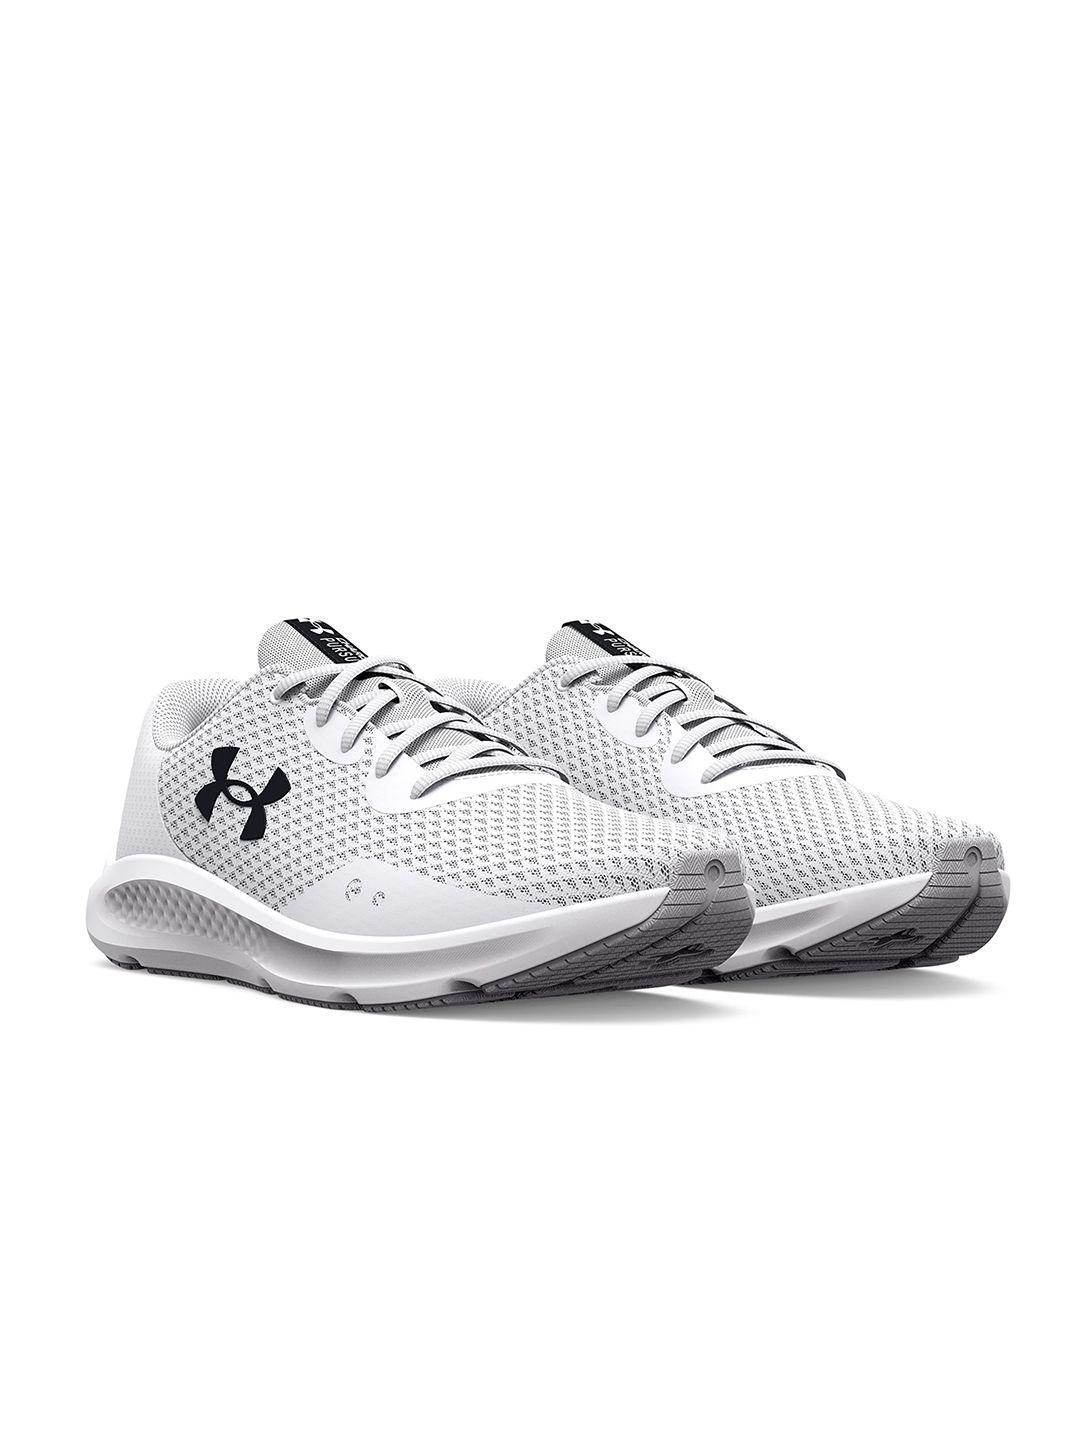 under armour women off-white & grey woven design charged pursuit 3 running shoes